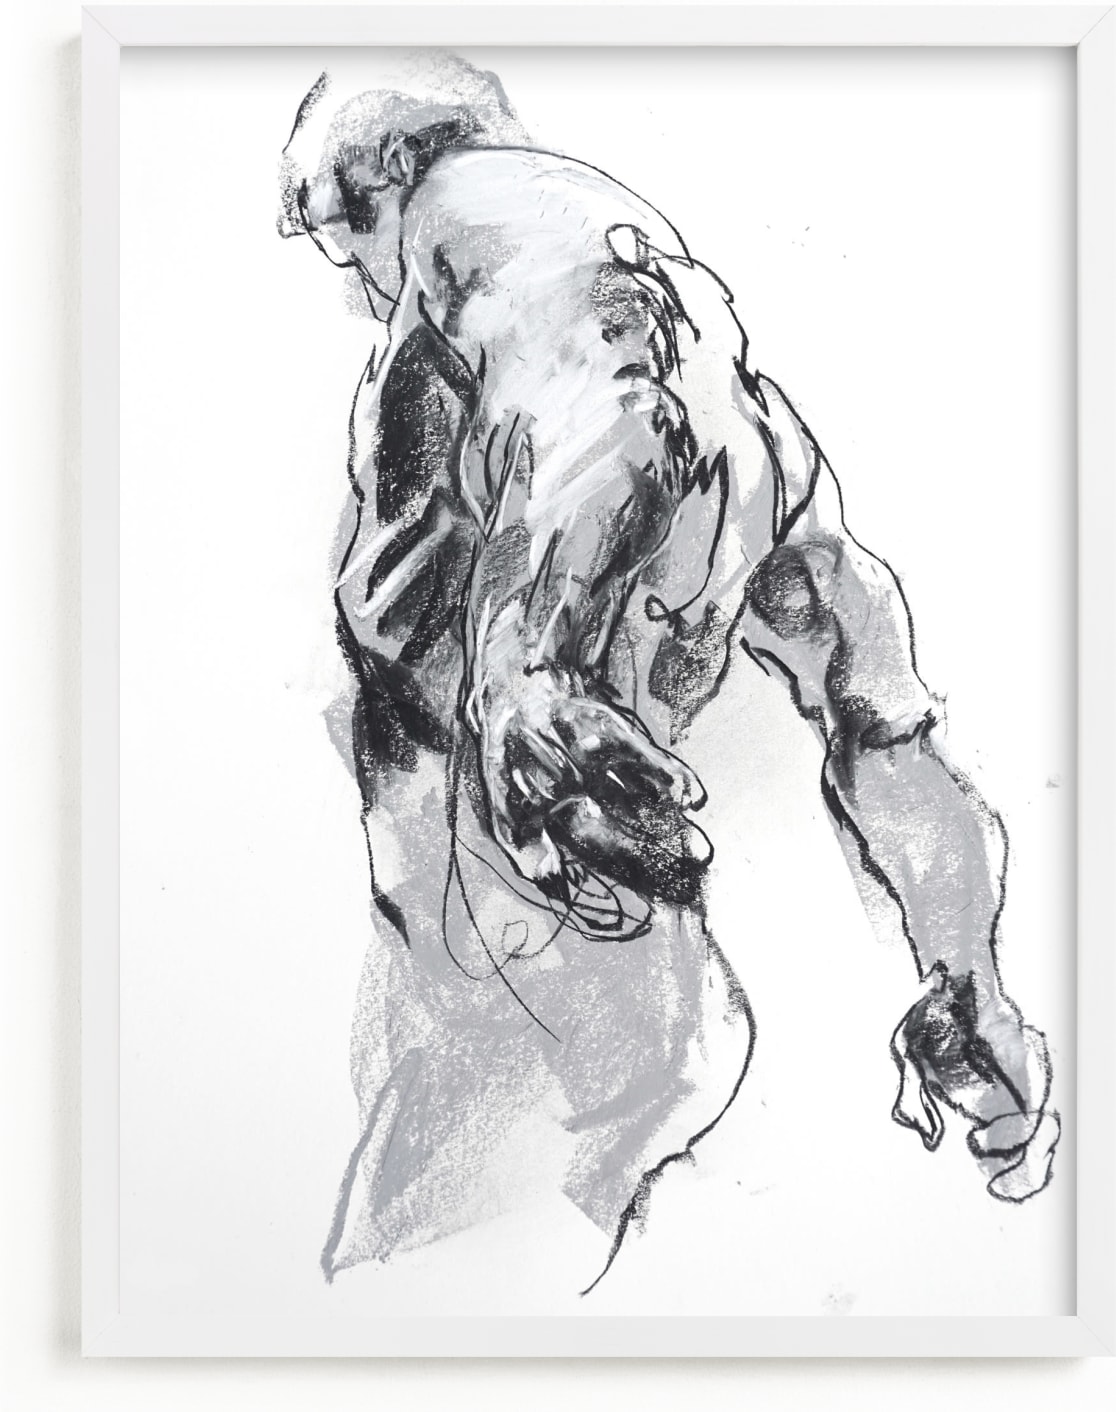 This is a black and white art by Derek overfield called Drawing 369 - Standing Man.